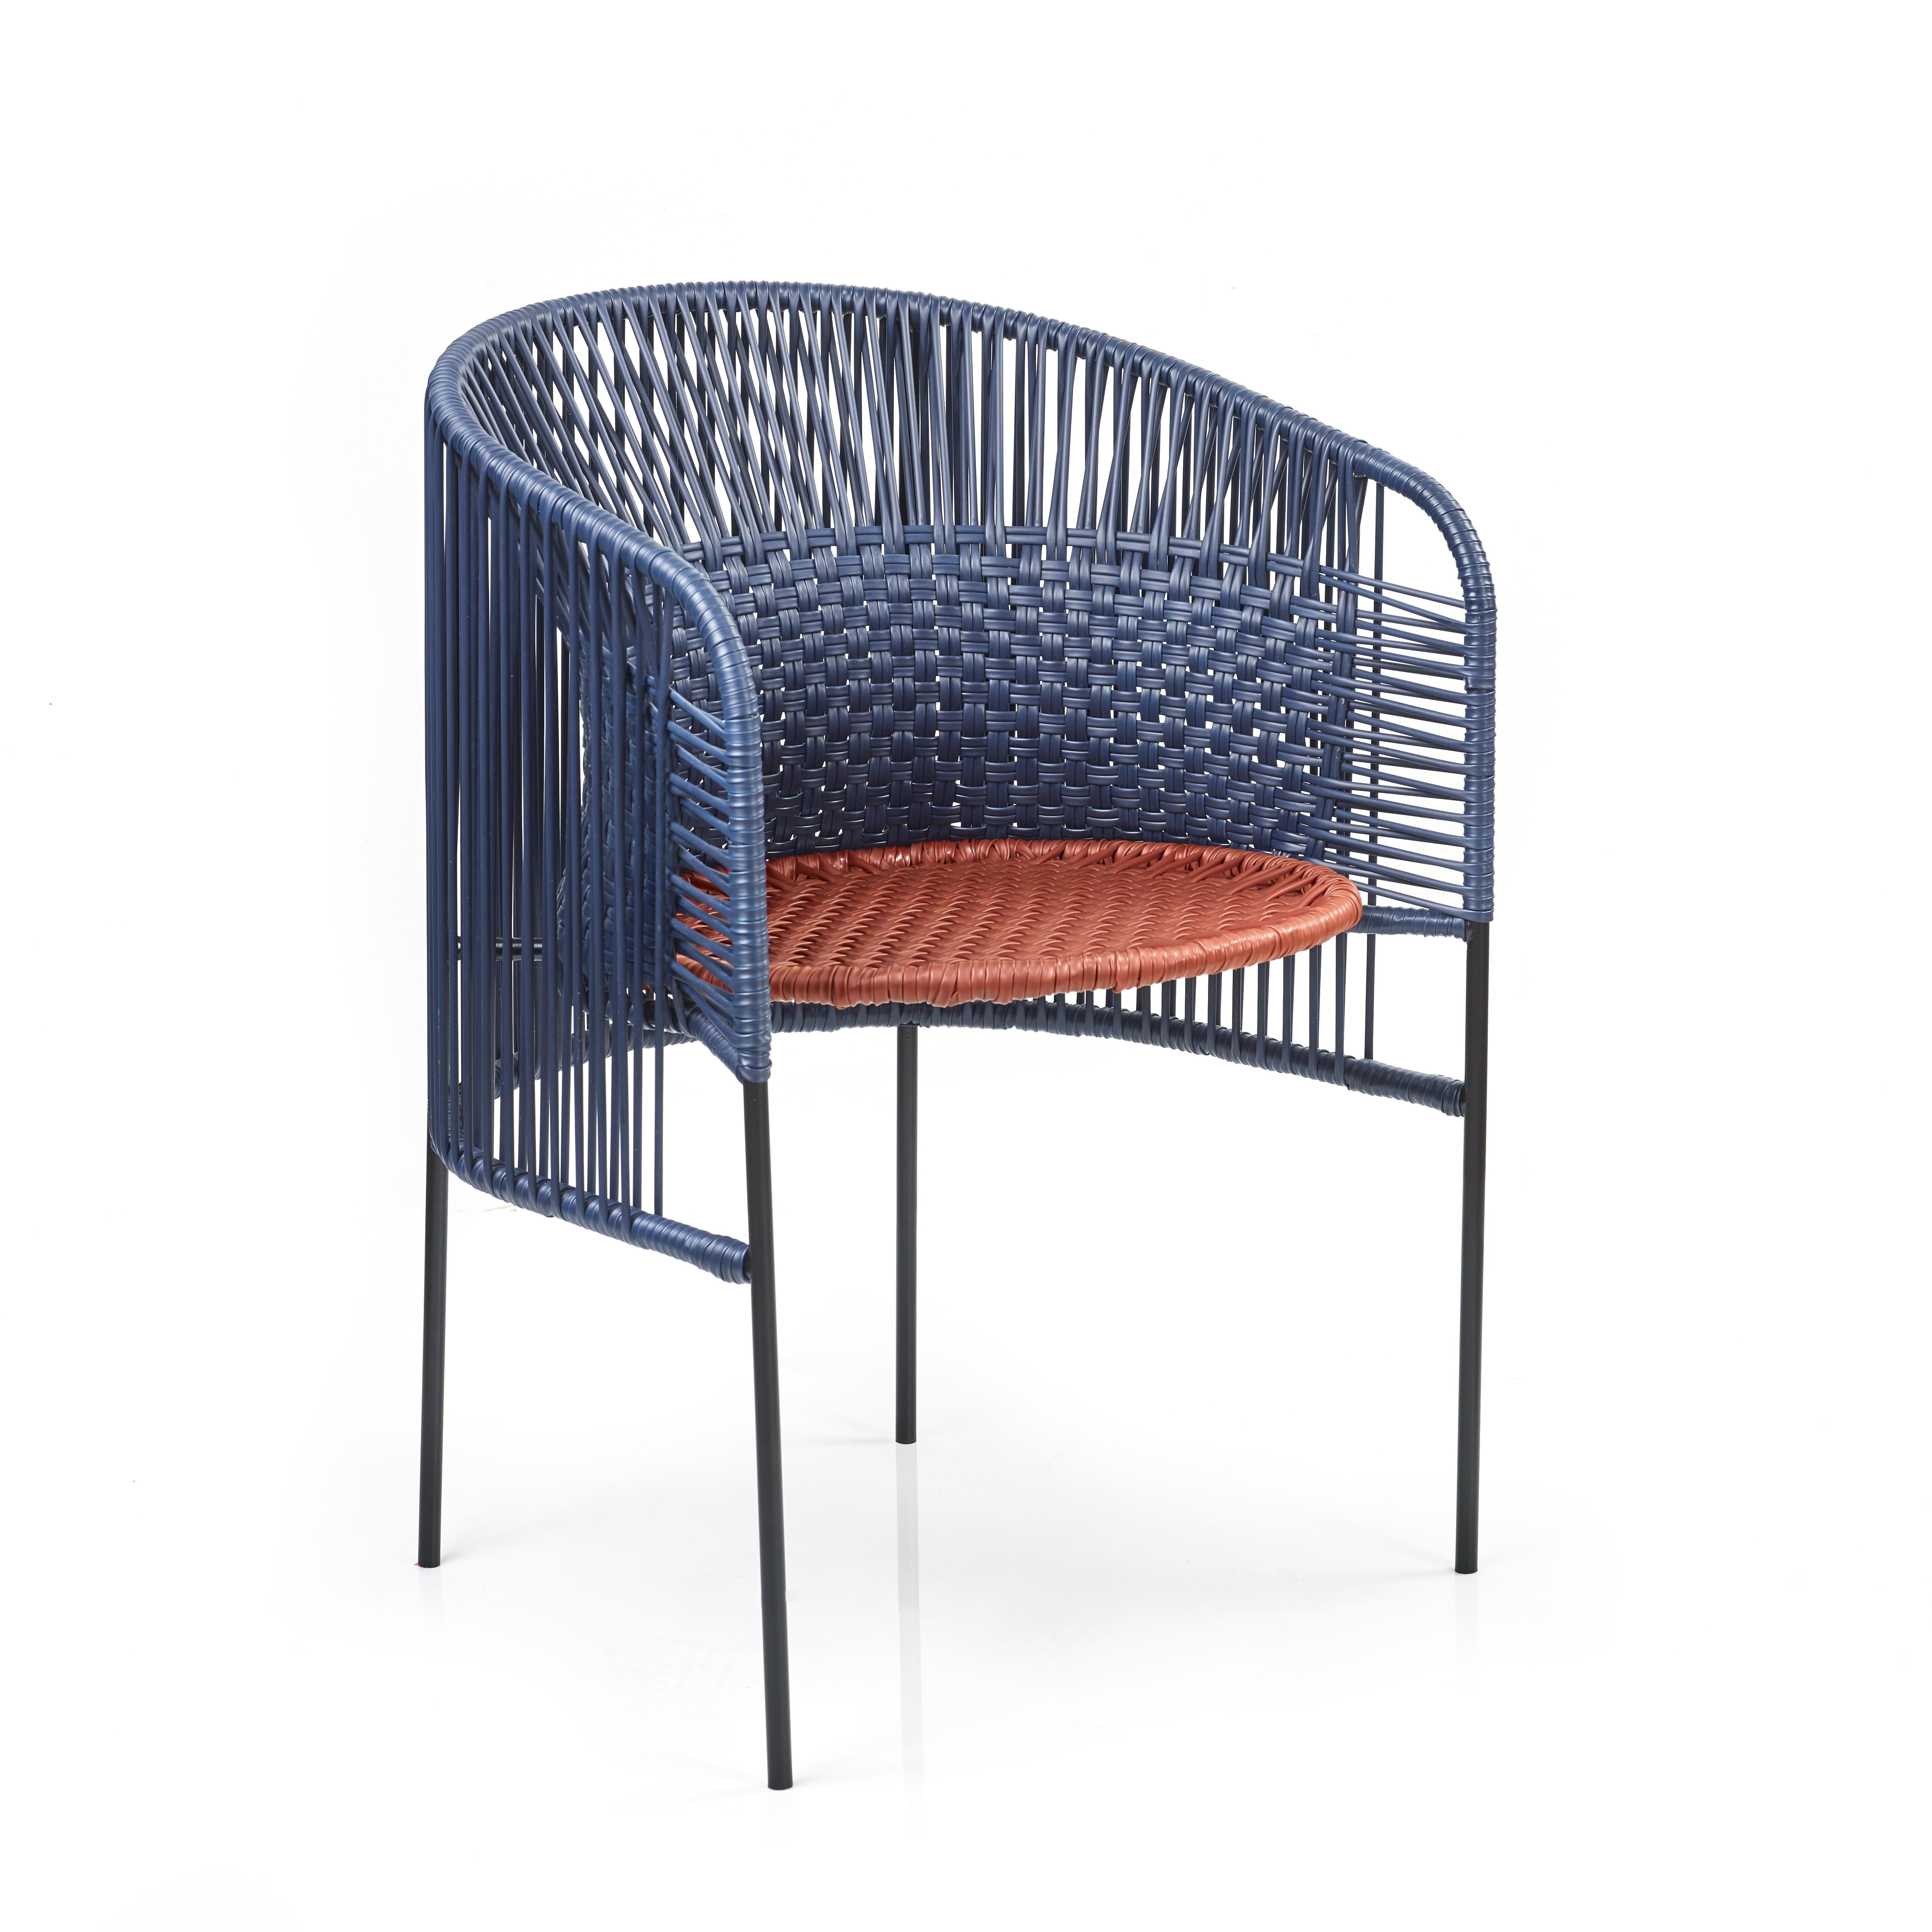 Blue caribe chic dining chair by Sebastian Herkner
Materials: Galvanized and powder-coated tubular steel. PVC strings are made from recycled plastic.
Technique: Made from recycled plastic and weaved by local craftspeople in Colombia. 
Dimensions: